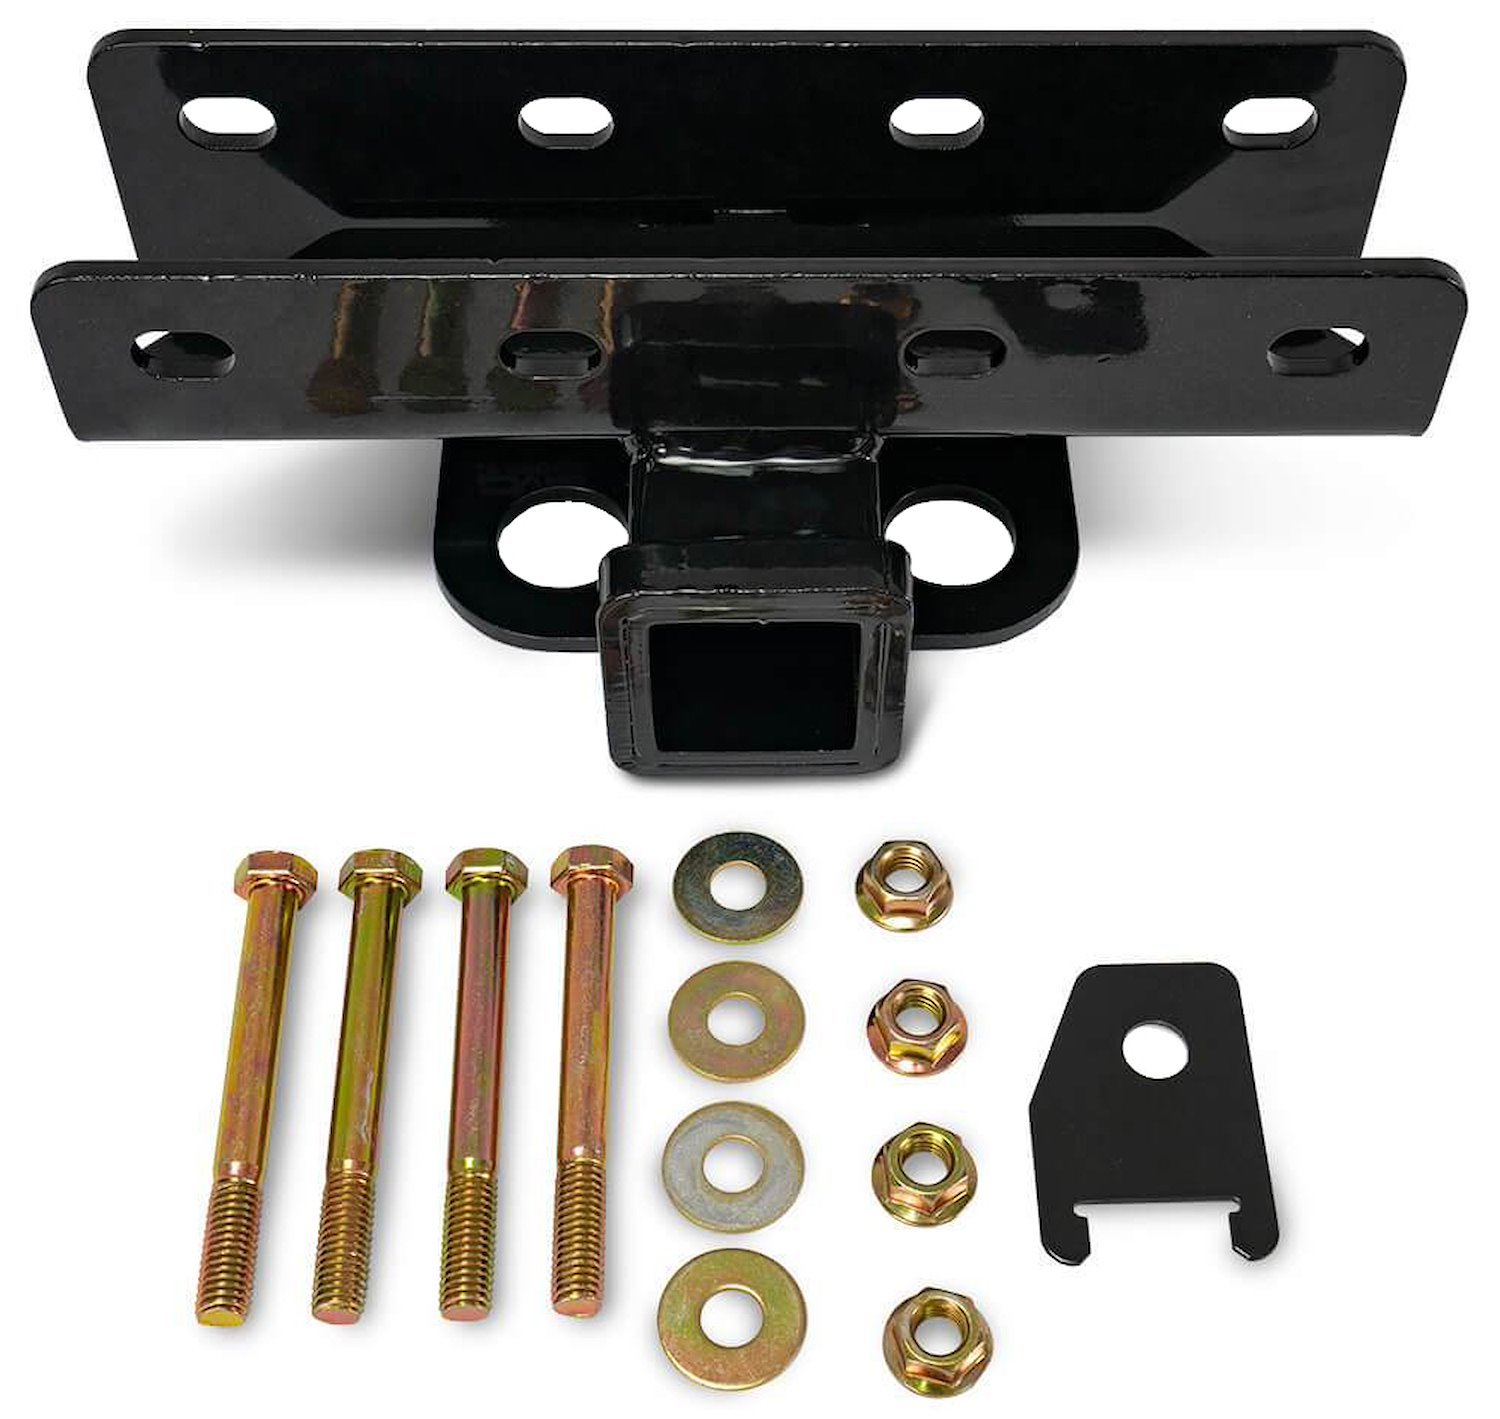 Bolt-On Accessory Hitch fits Select Late-Model Jeep Wrangler